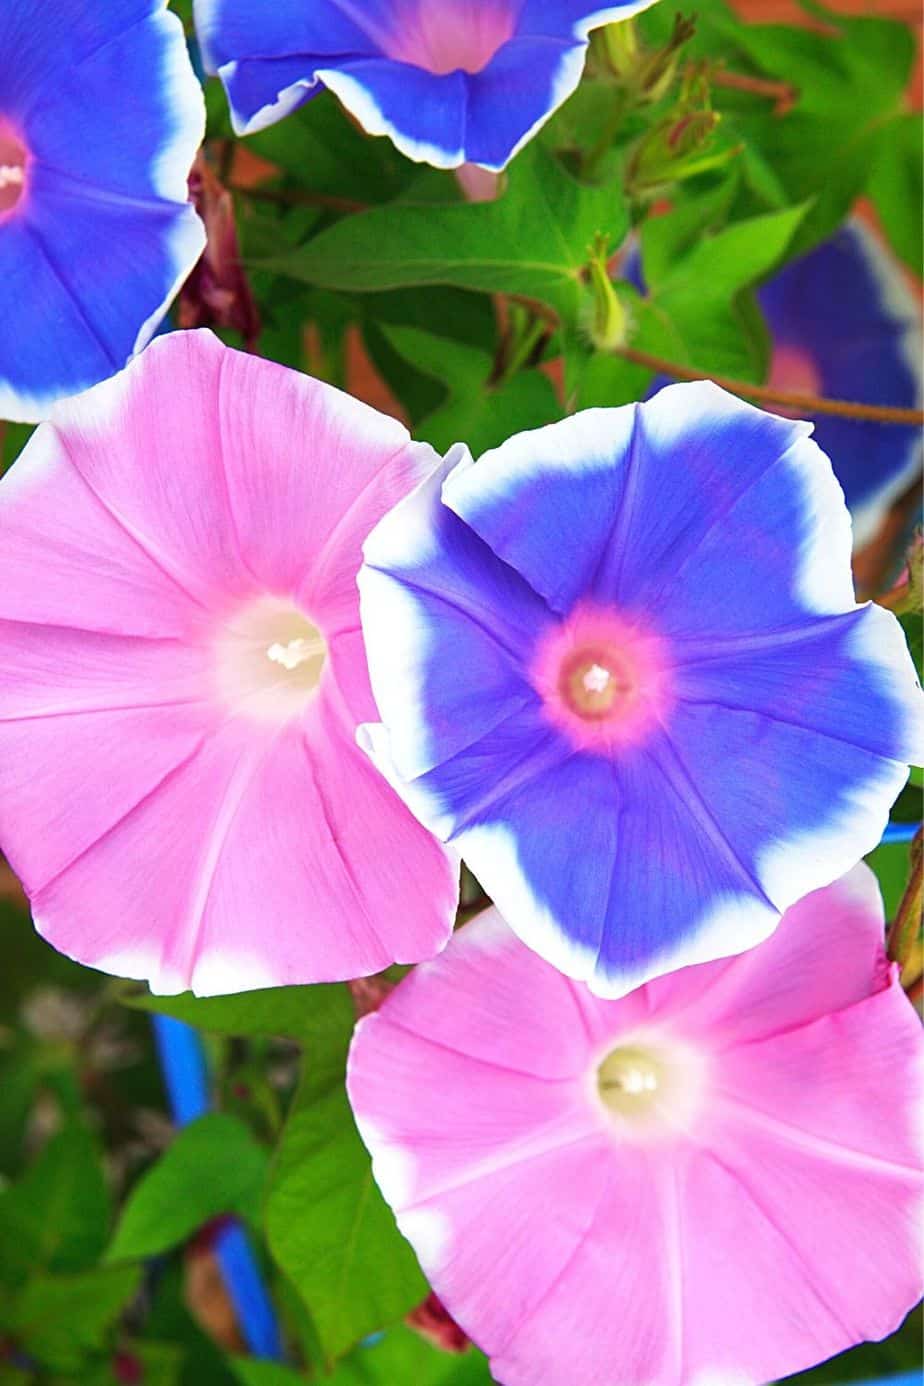 Morning Glory is another colorful flower with trumpet-shaped blooms that you can grow on your west-facing balcony